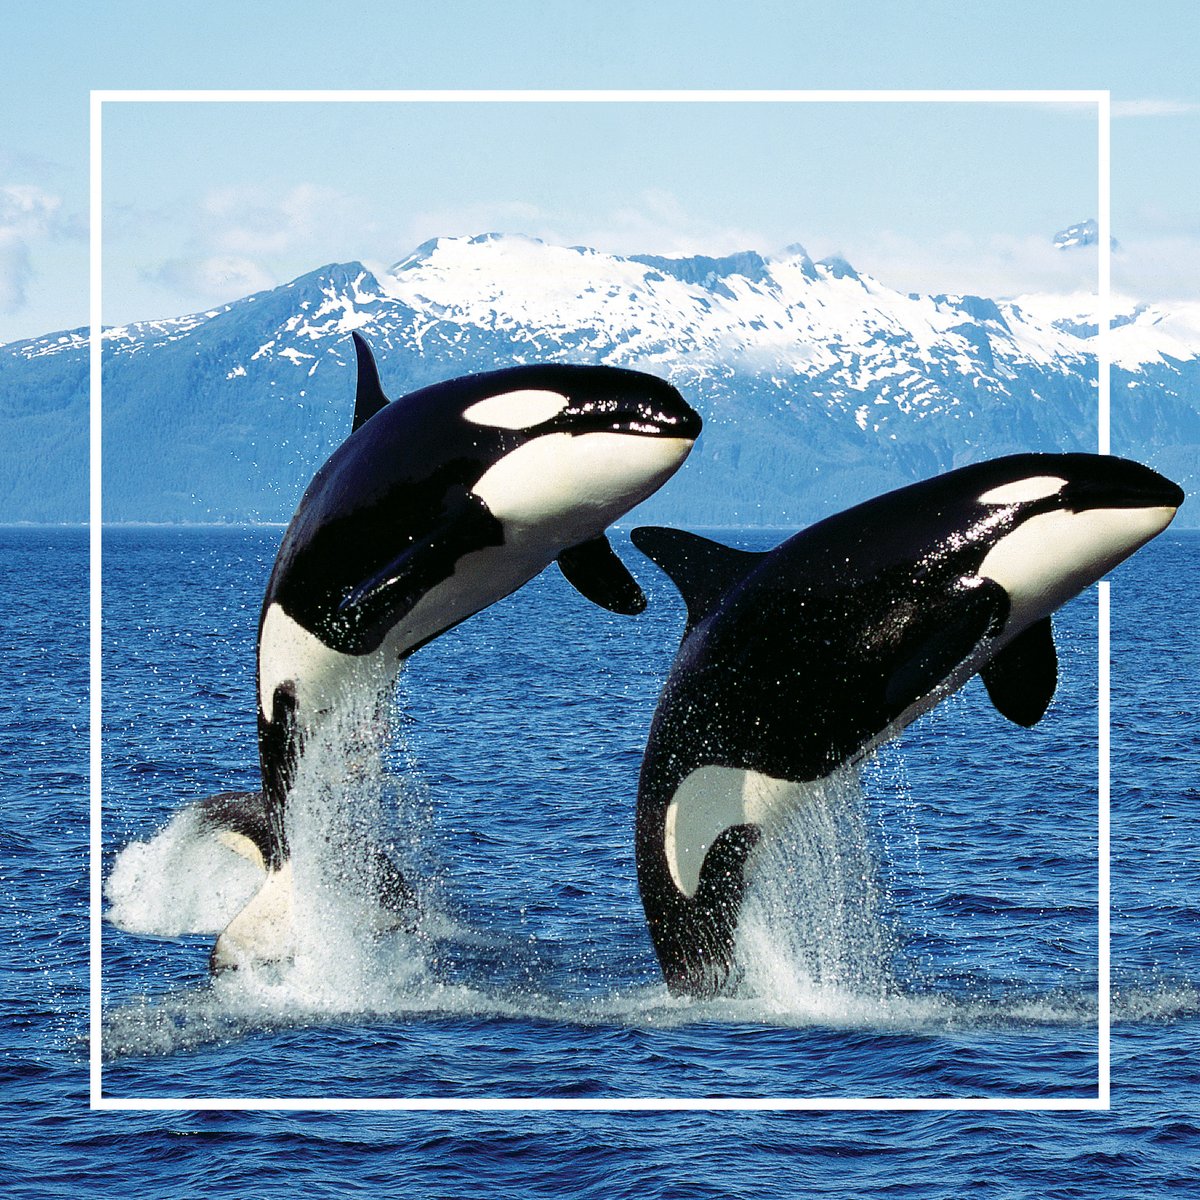 Embrace the Majestic Wilderness! 🌿📆 Our calendar captures the awe-inspiring beauty of animals in their natural habitats! 📸✨ 

Check teldon.com to see our fantastic calendar  🌍 🐋

#teldonconncet #everymomentmatters #printmarketing #MajesticWilderness